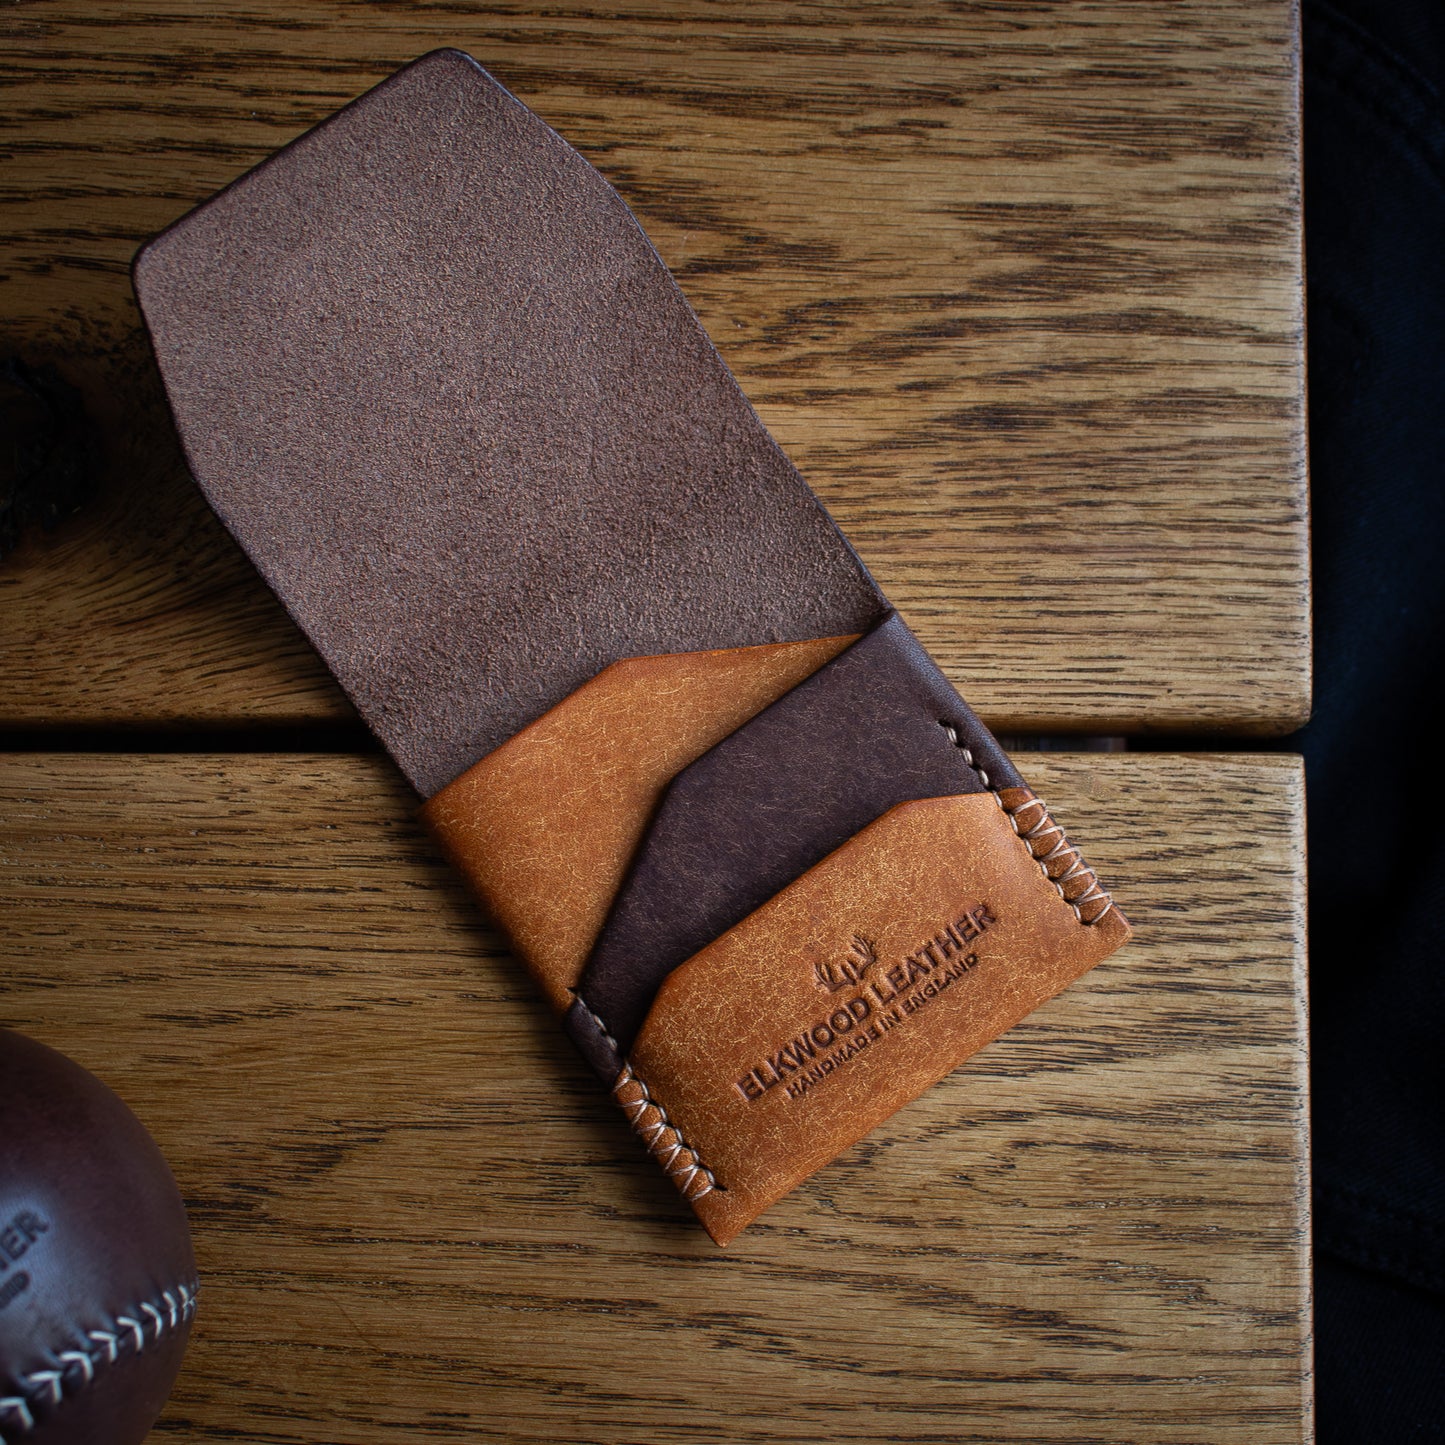 PDF TEMPLATE Elkwood Leather - The Blackthorn - EDC Flap full grain Italian Pueblo leather cardholder - brown leather wallet open wooden table next to brown leather baseball